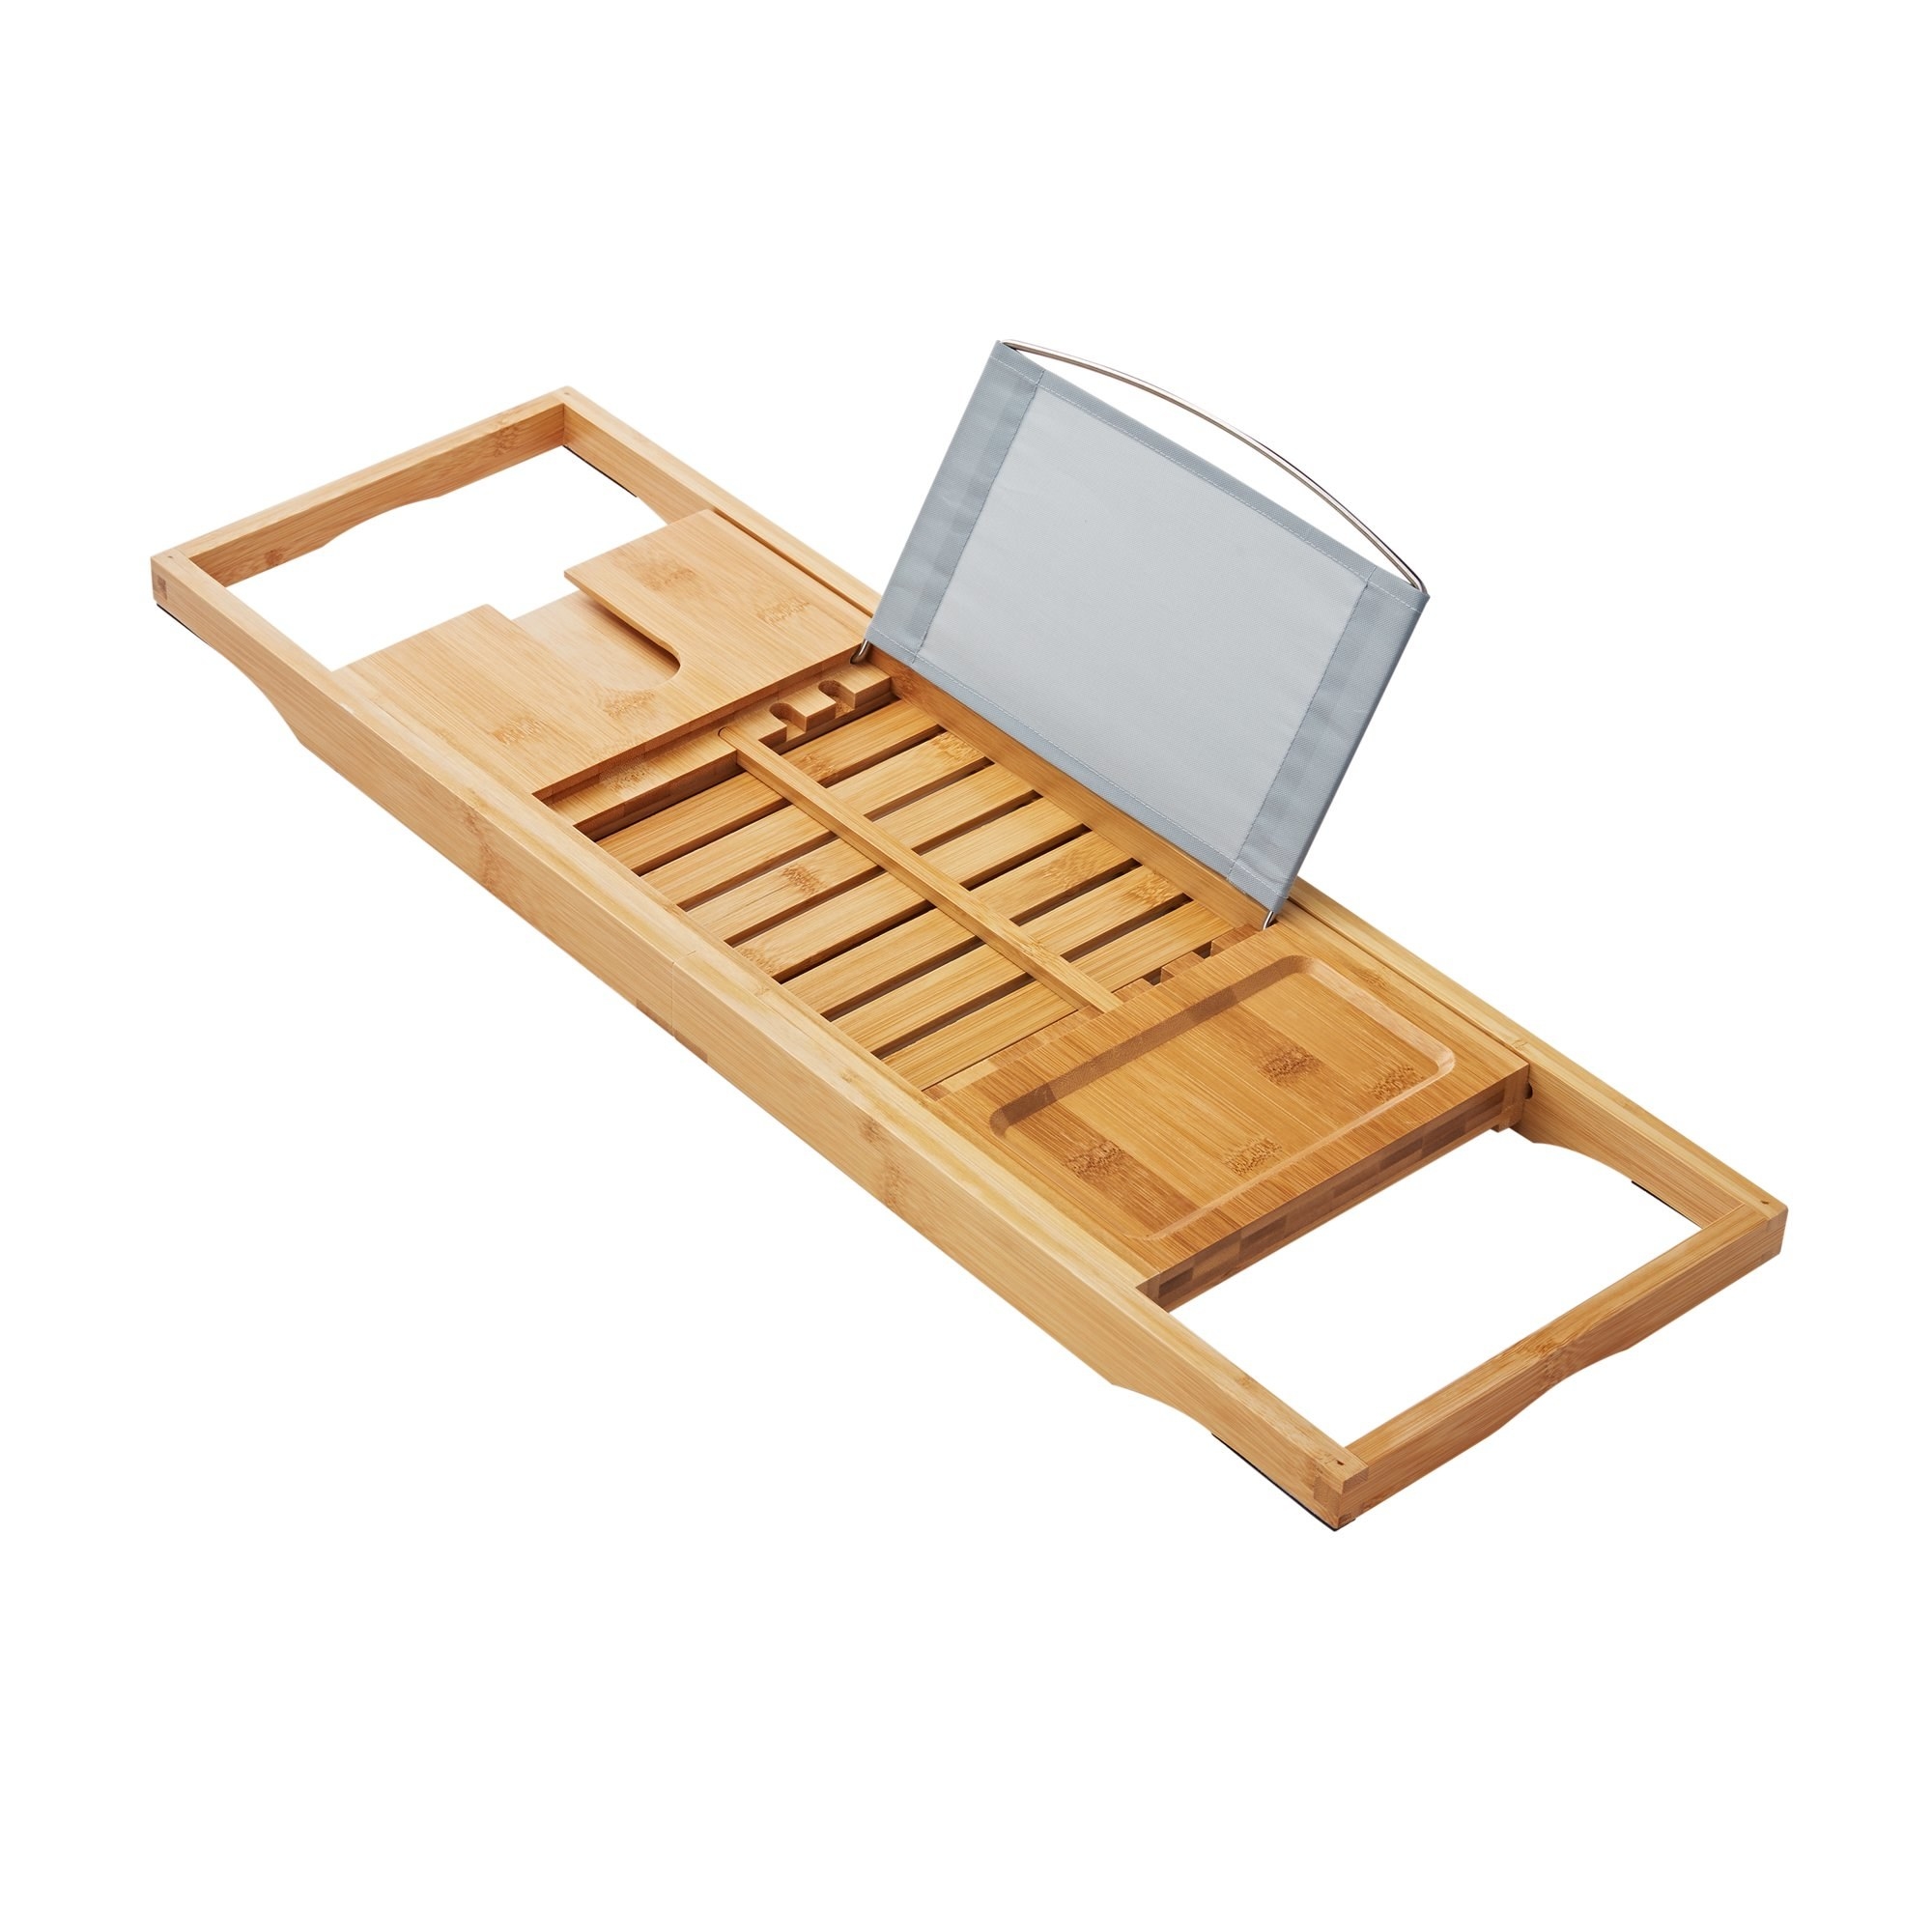 A bamboo bath try with a lift-up easel to help prop up books or devices